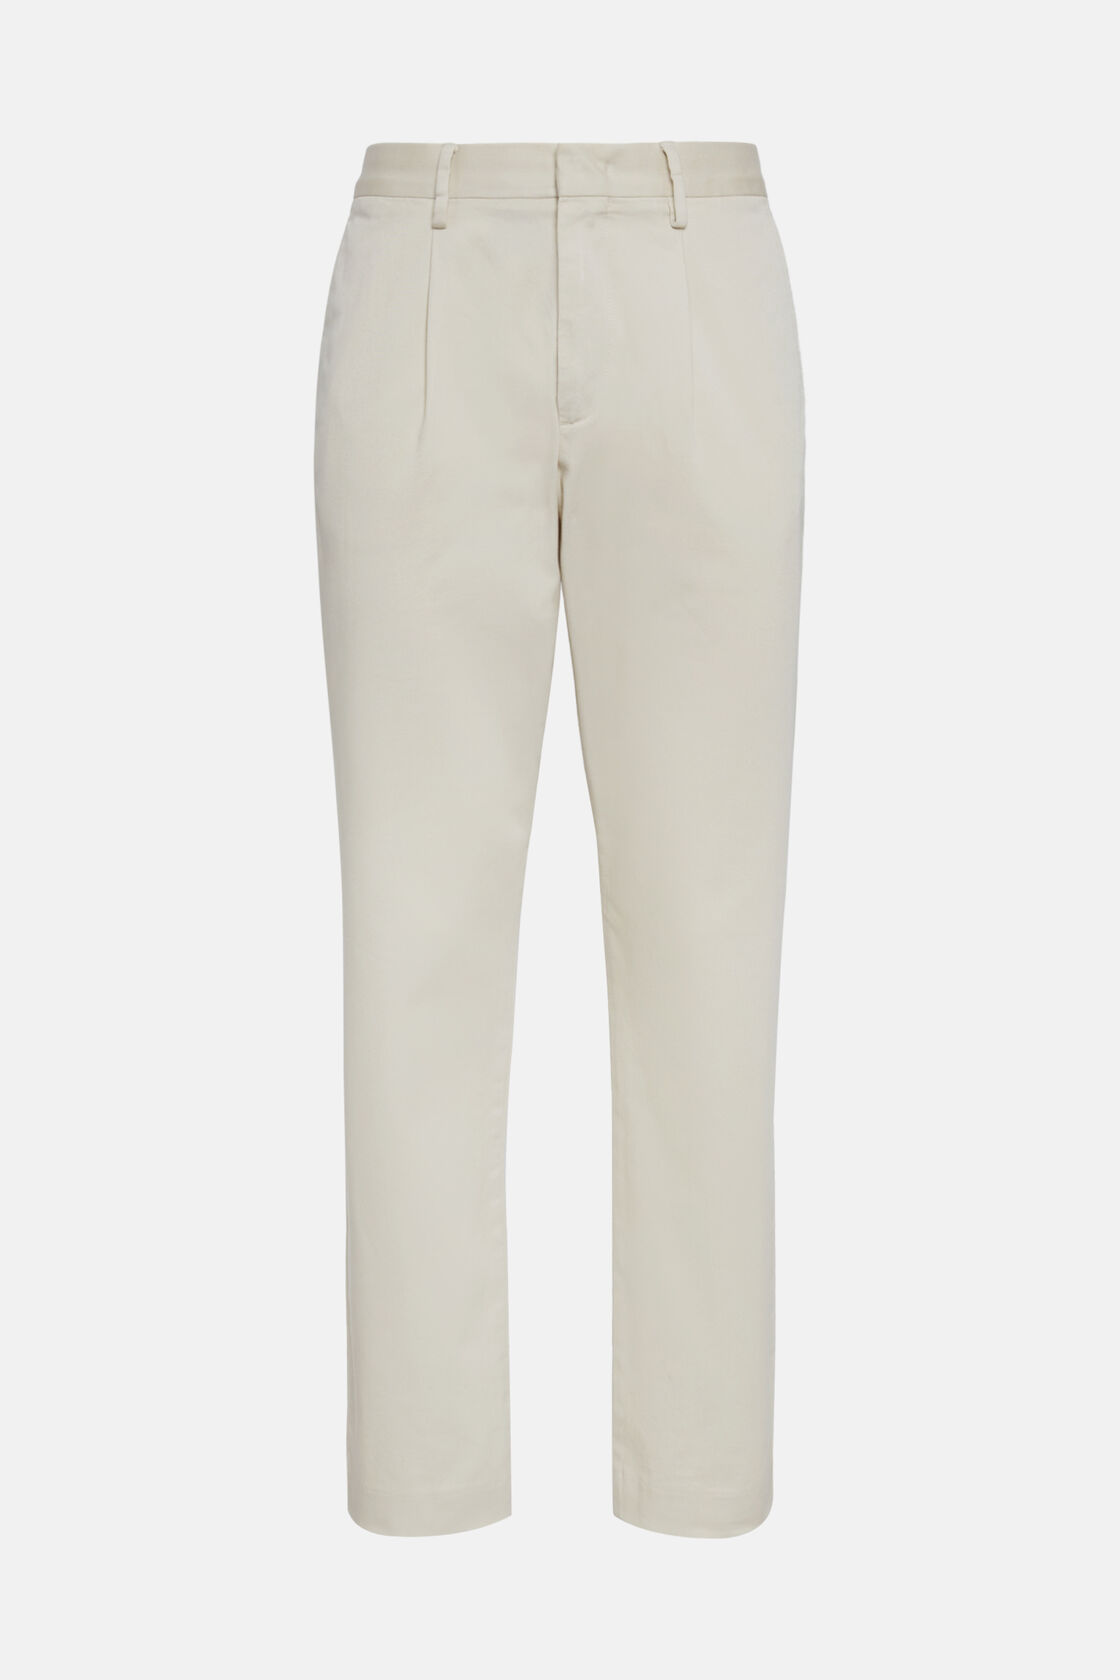 Stretch Cotton Trousers, Sand, hi-res